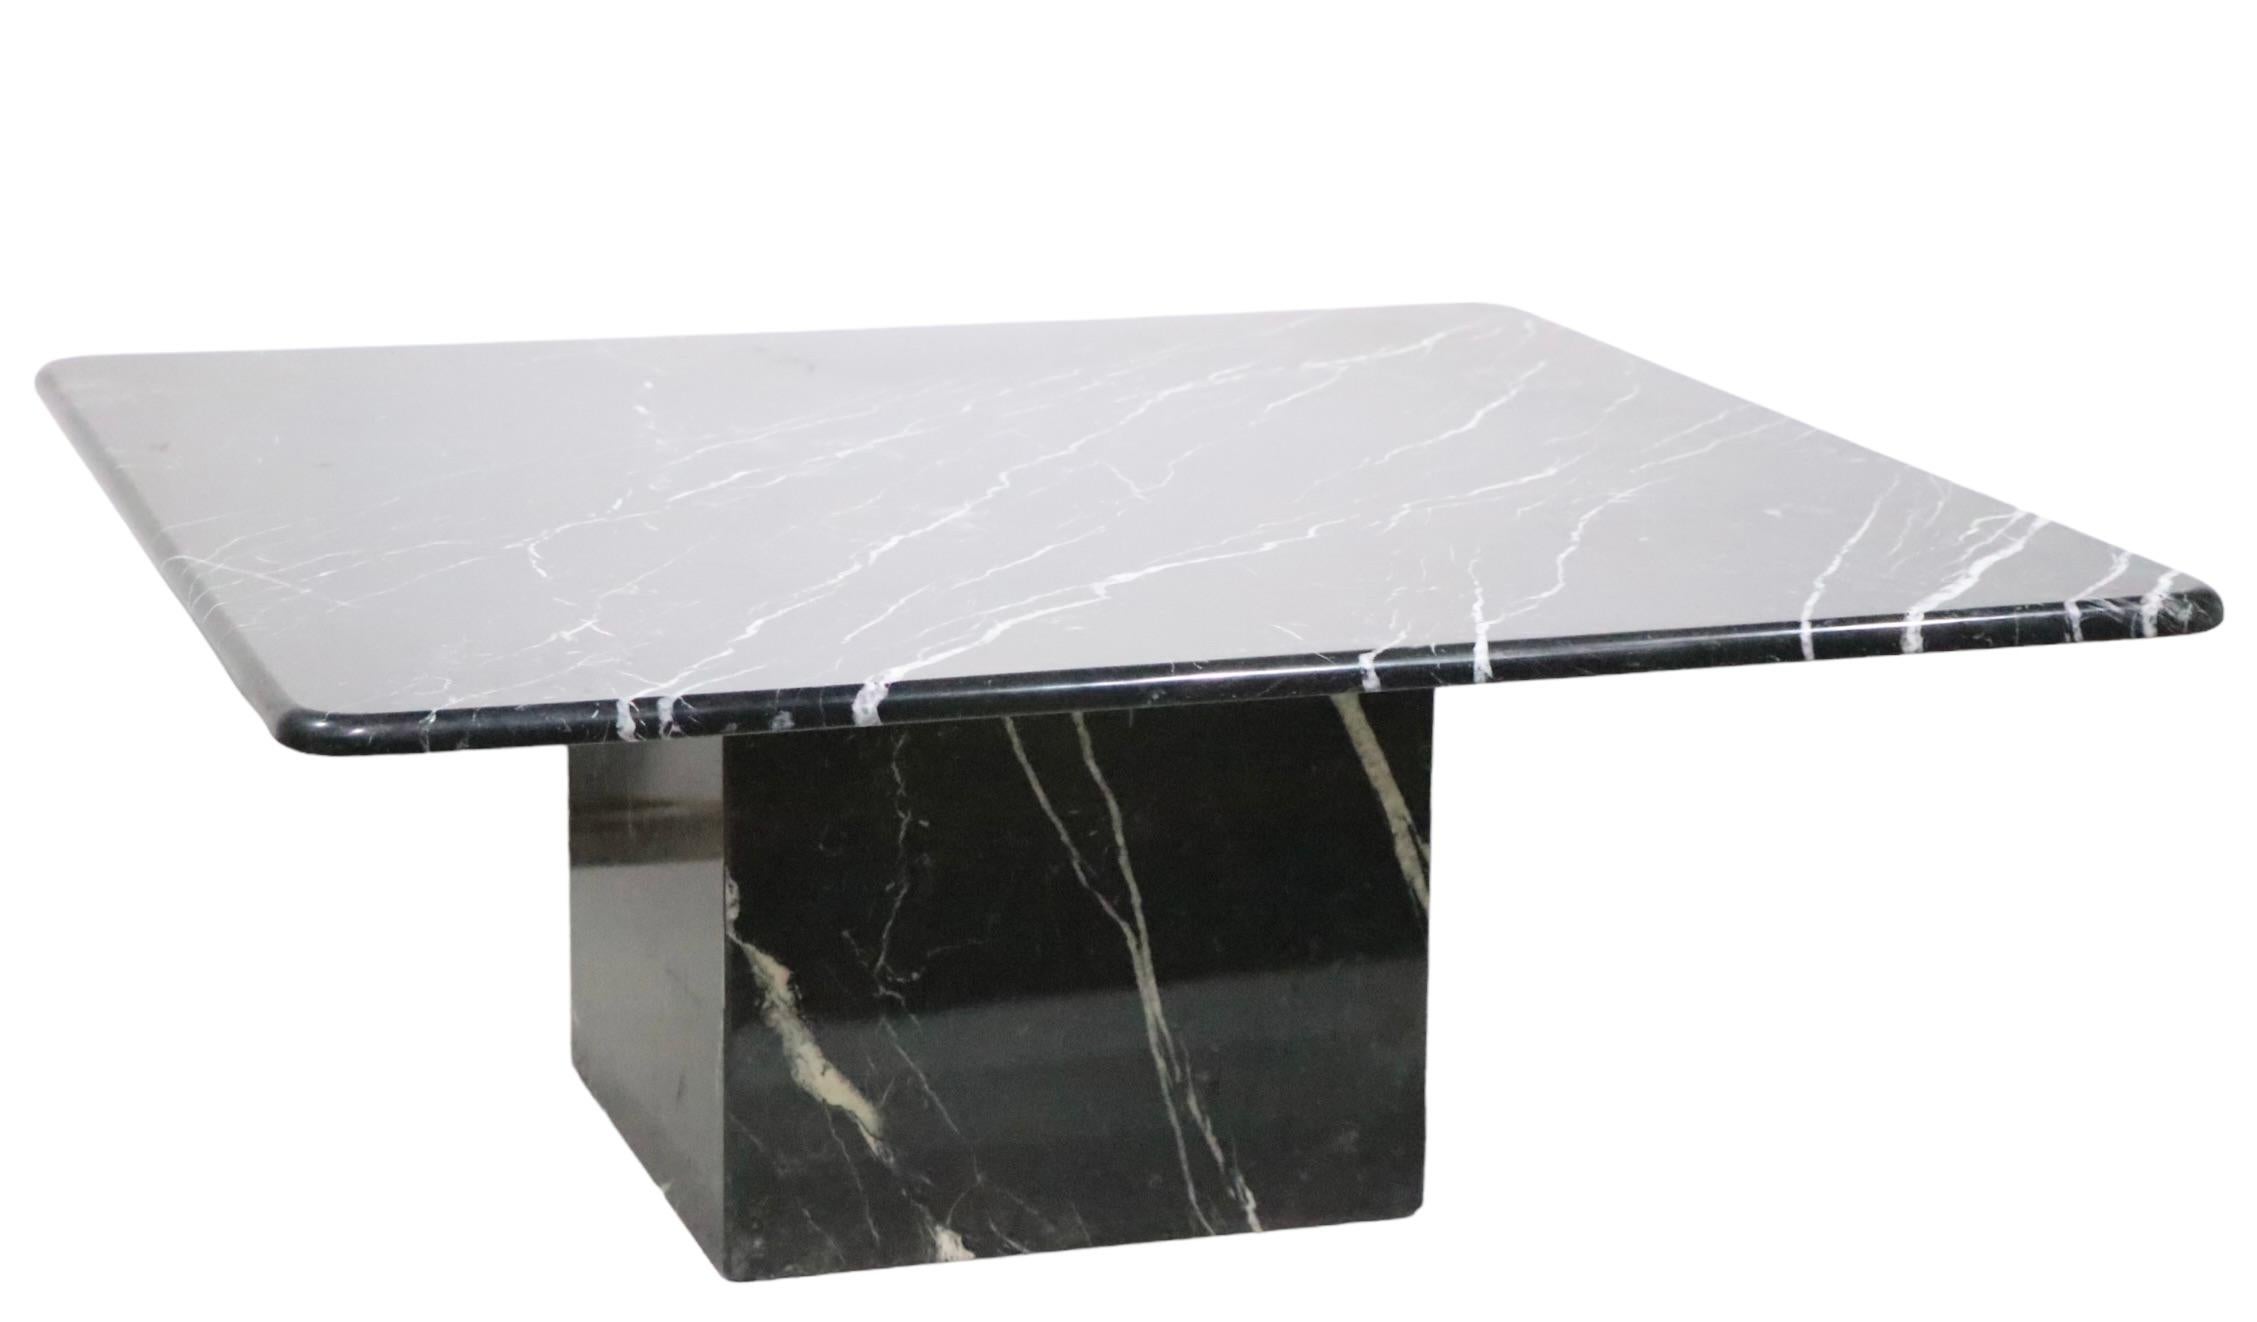 Italian Post Modern Black Marble Pedestal Base Coffee Table Made in Italy c 1970’s For Sale